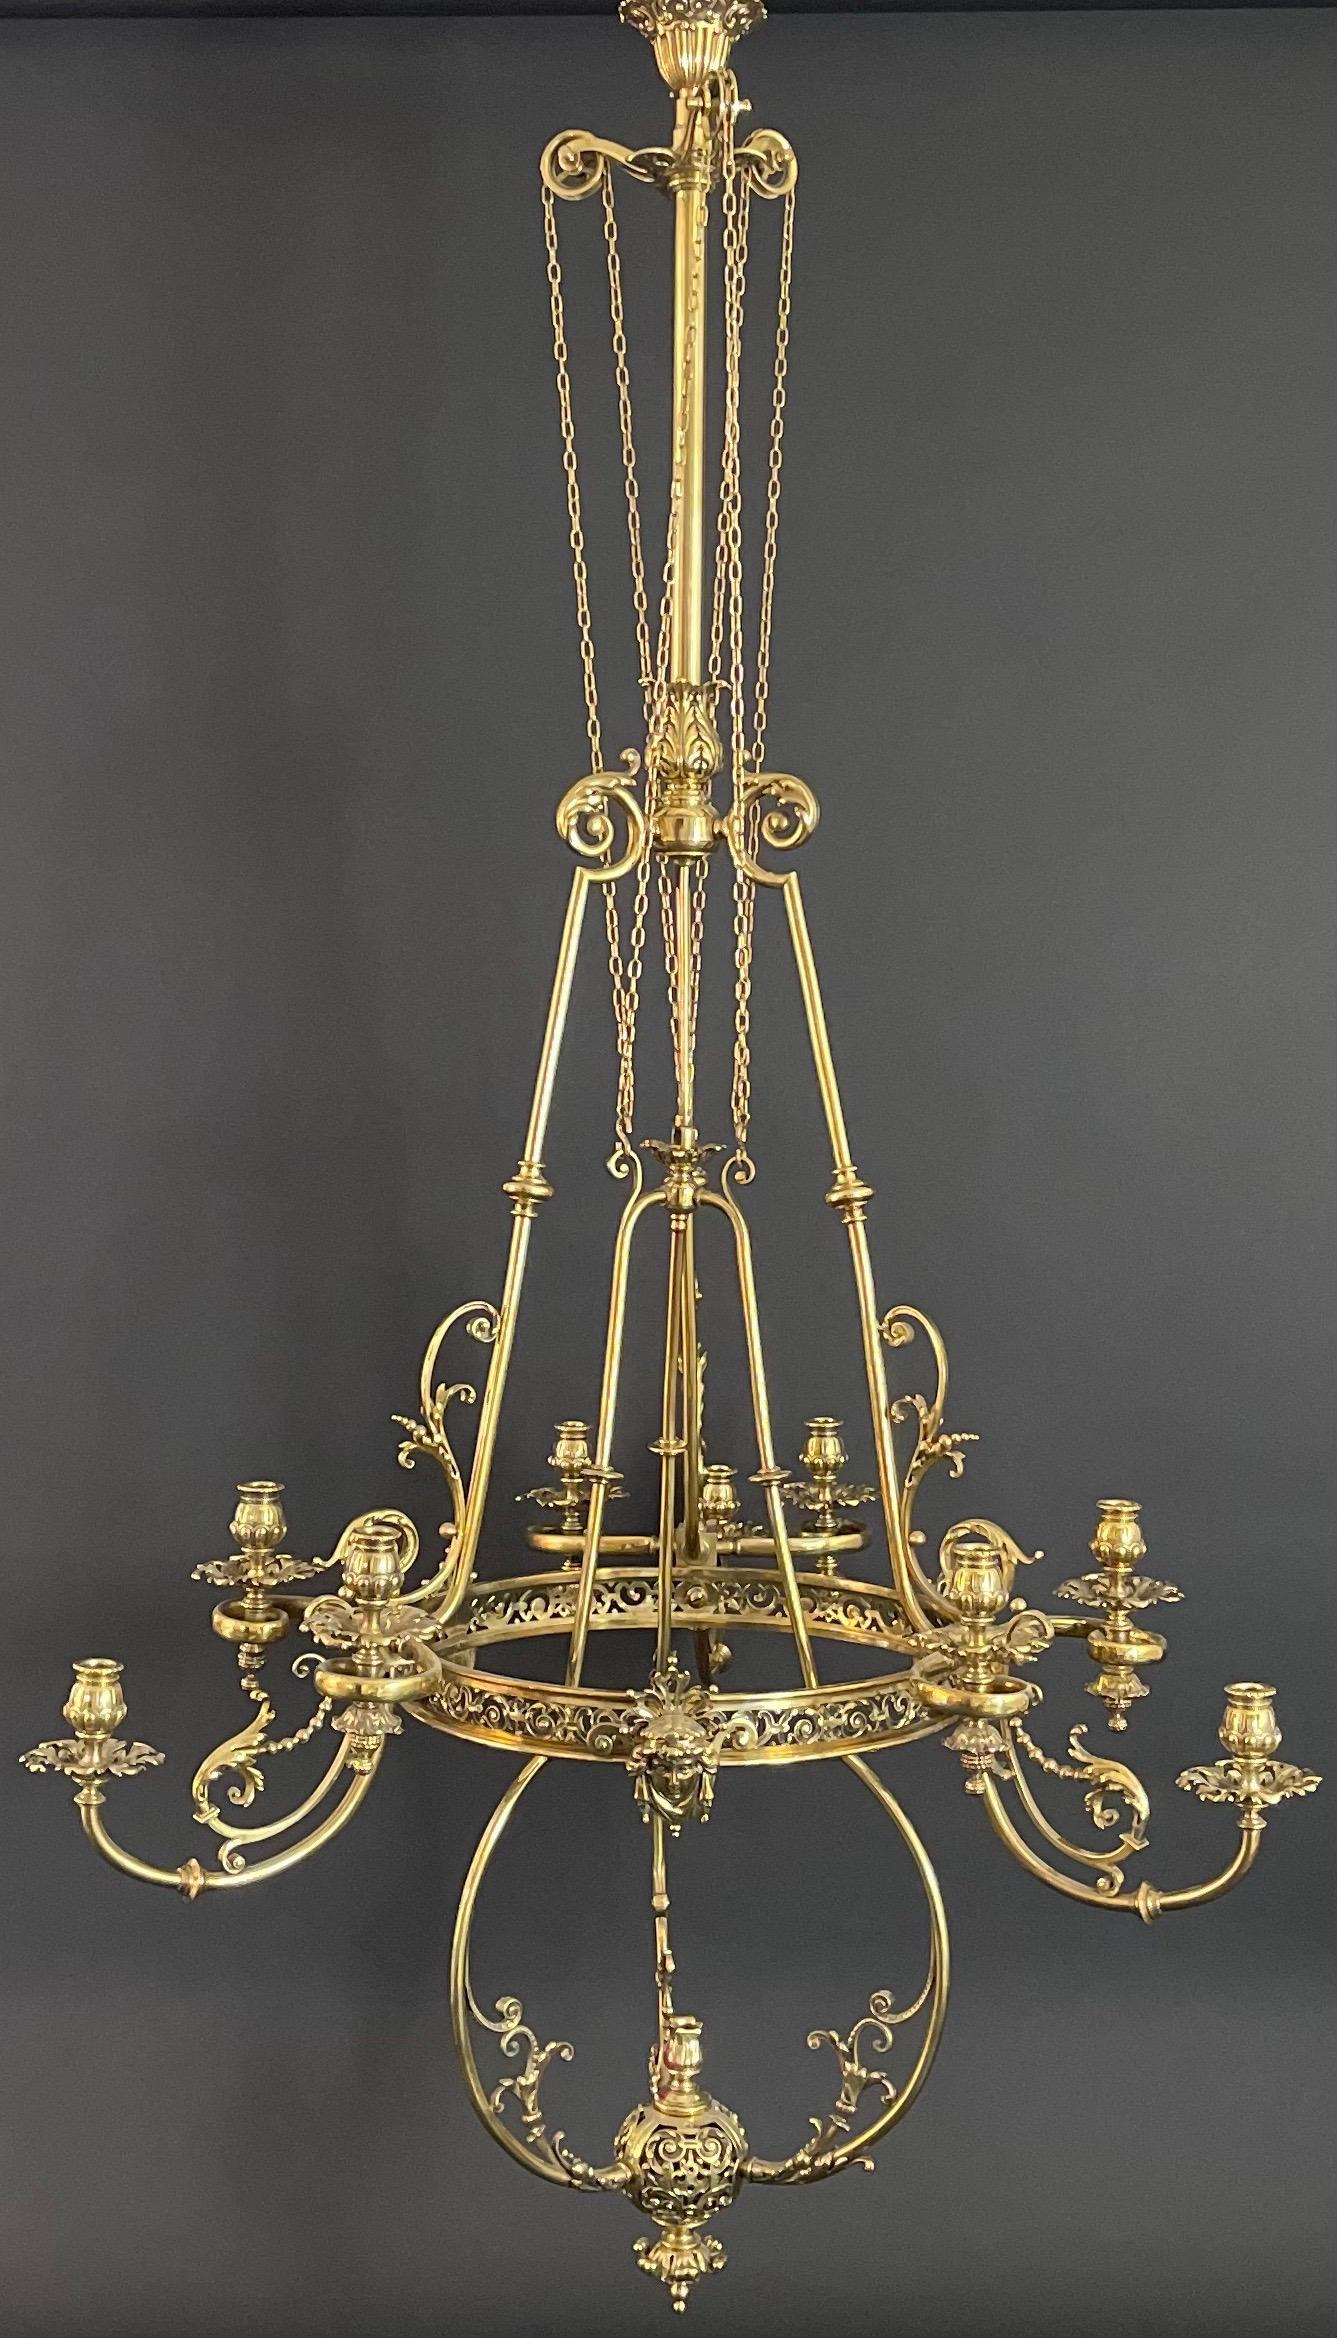 A huge, spectacular  late 18th / early 19th German or English ormolu 10 - light chandelier.
The chandelier can be used as a candelabra or can be electrified (on request).
The height is adjustable -  up to 78.74 inches.
